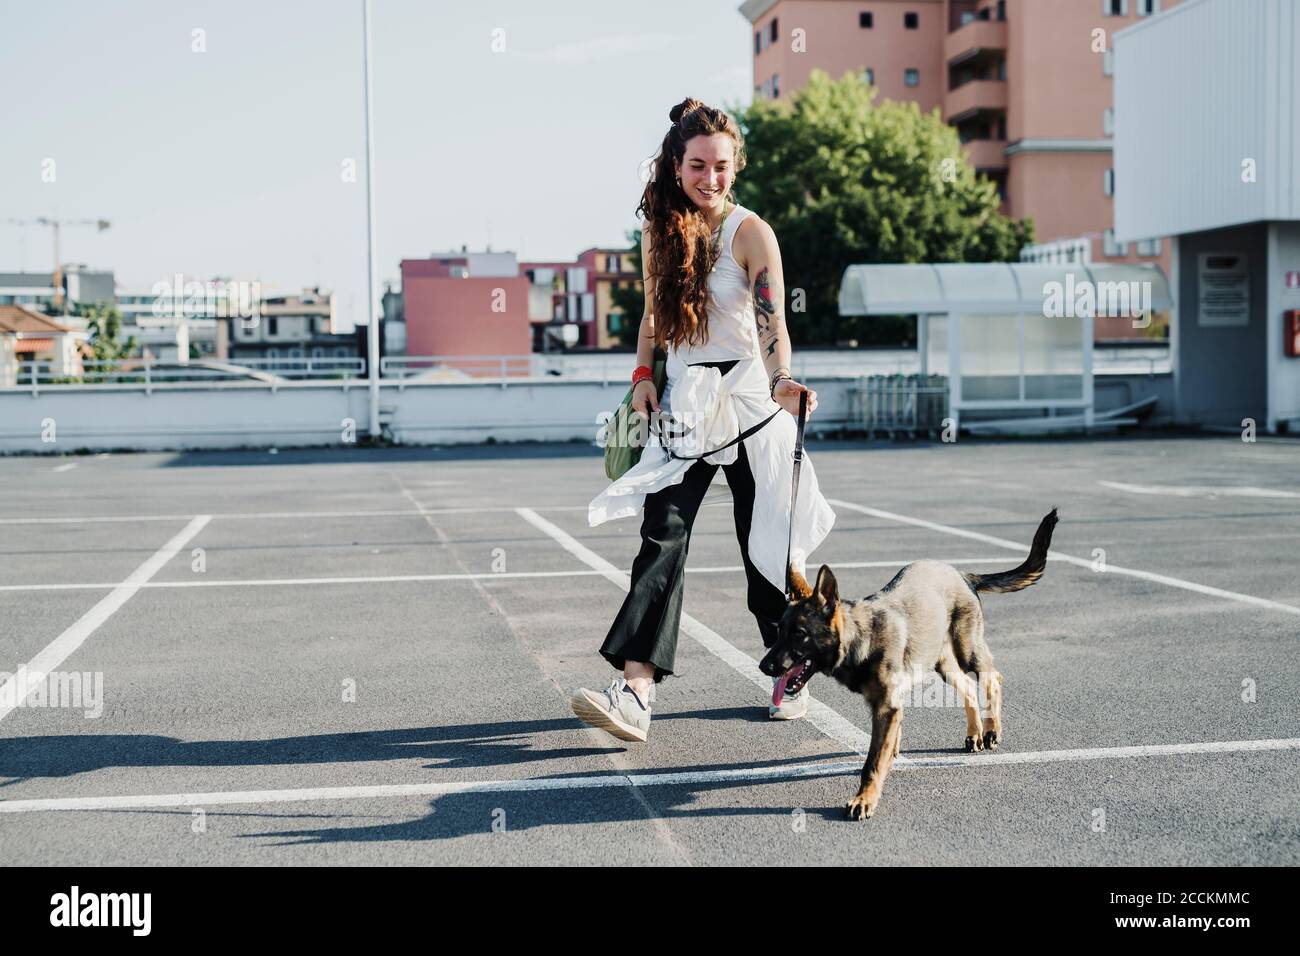 Woman walking with dog in parking lot Stock Photo